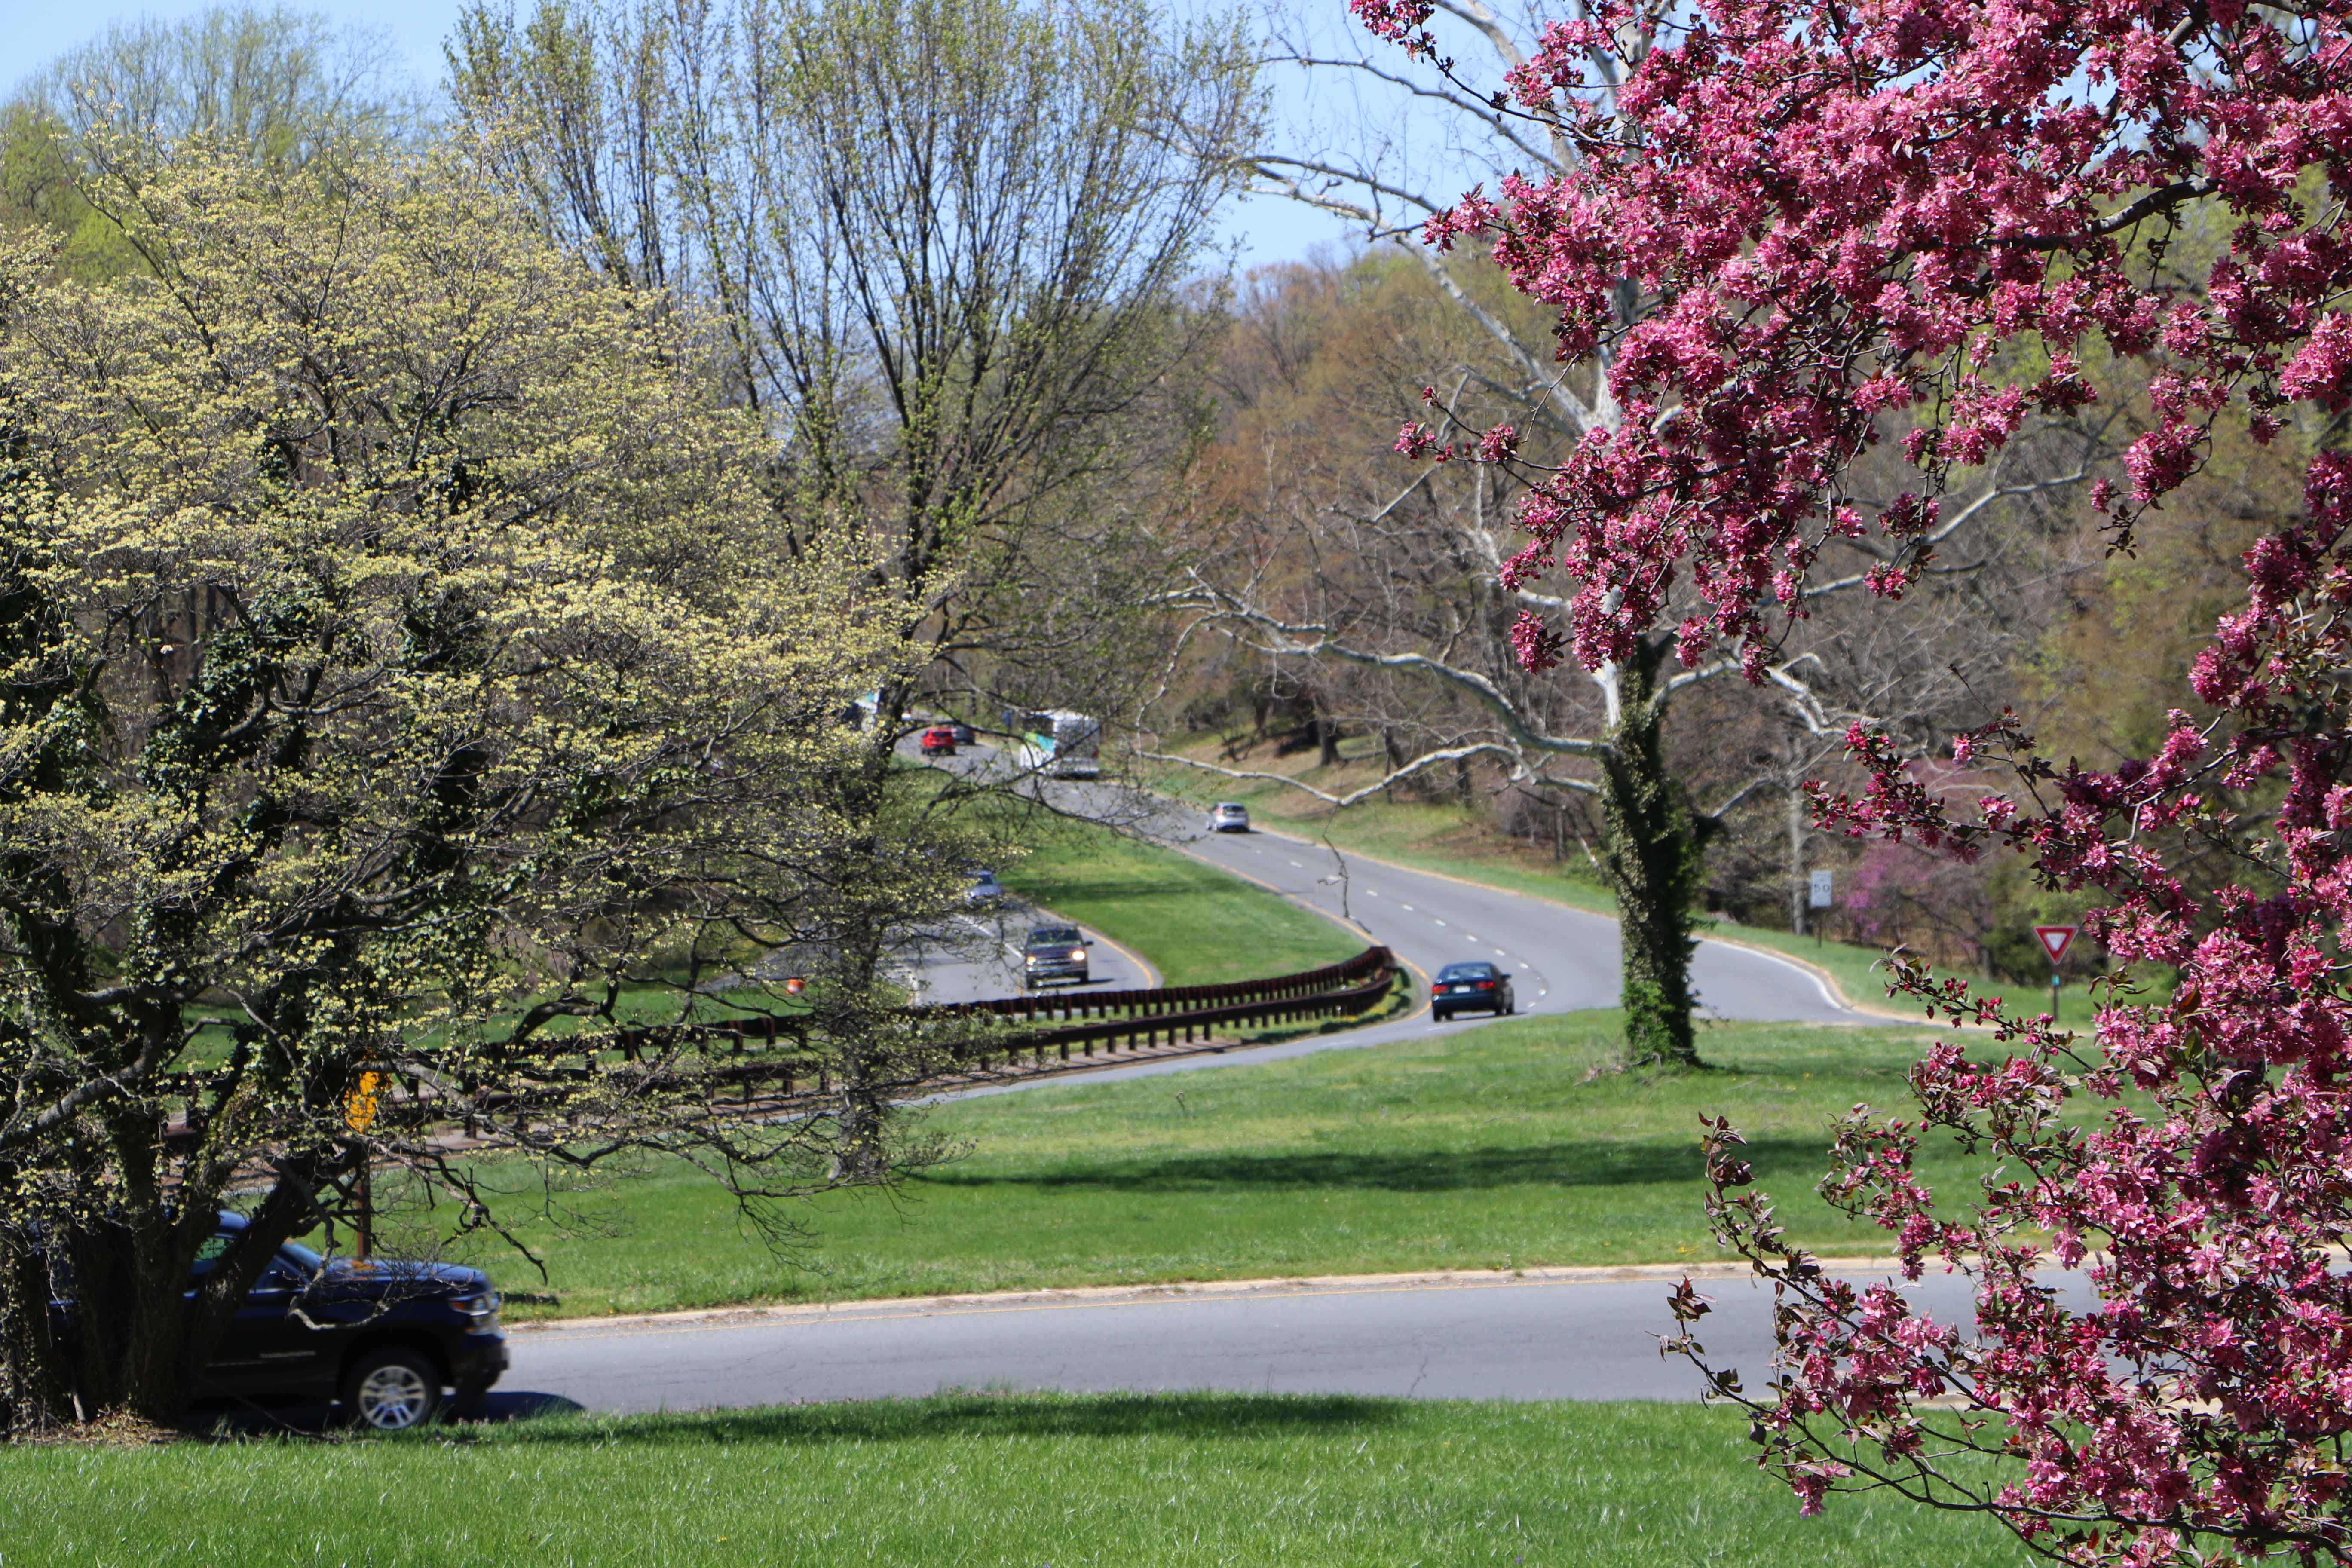 Pretty image of the parkway in spring.